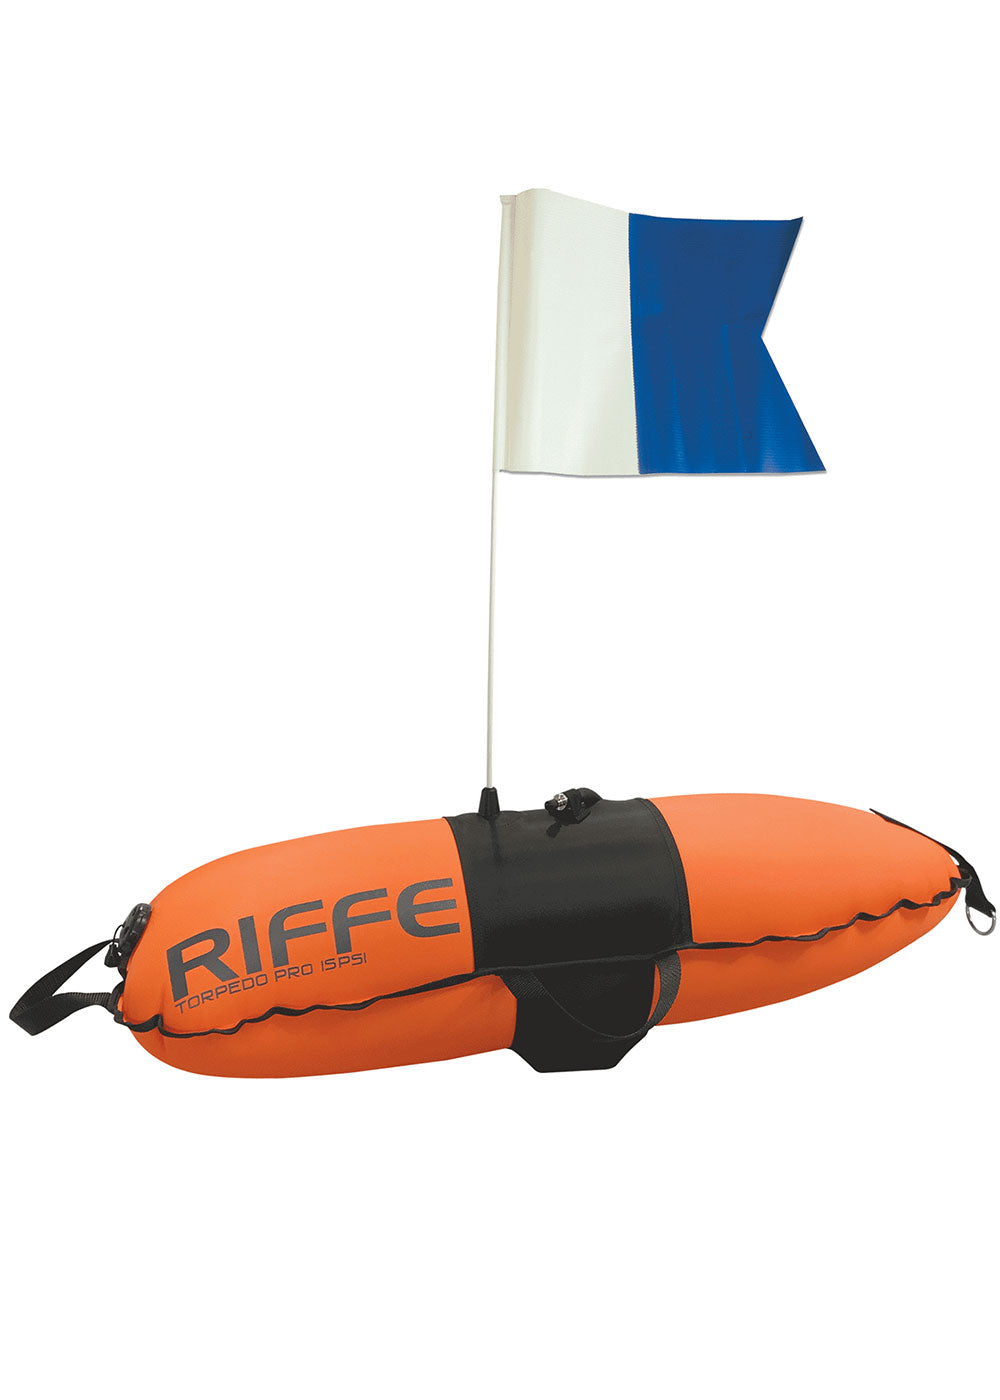 Riffe Torpedo Pro Dive Float w/Flag Features